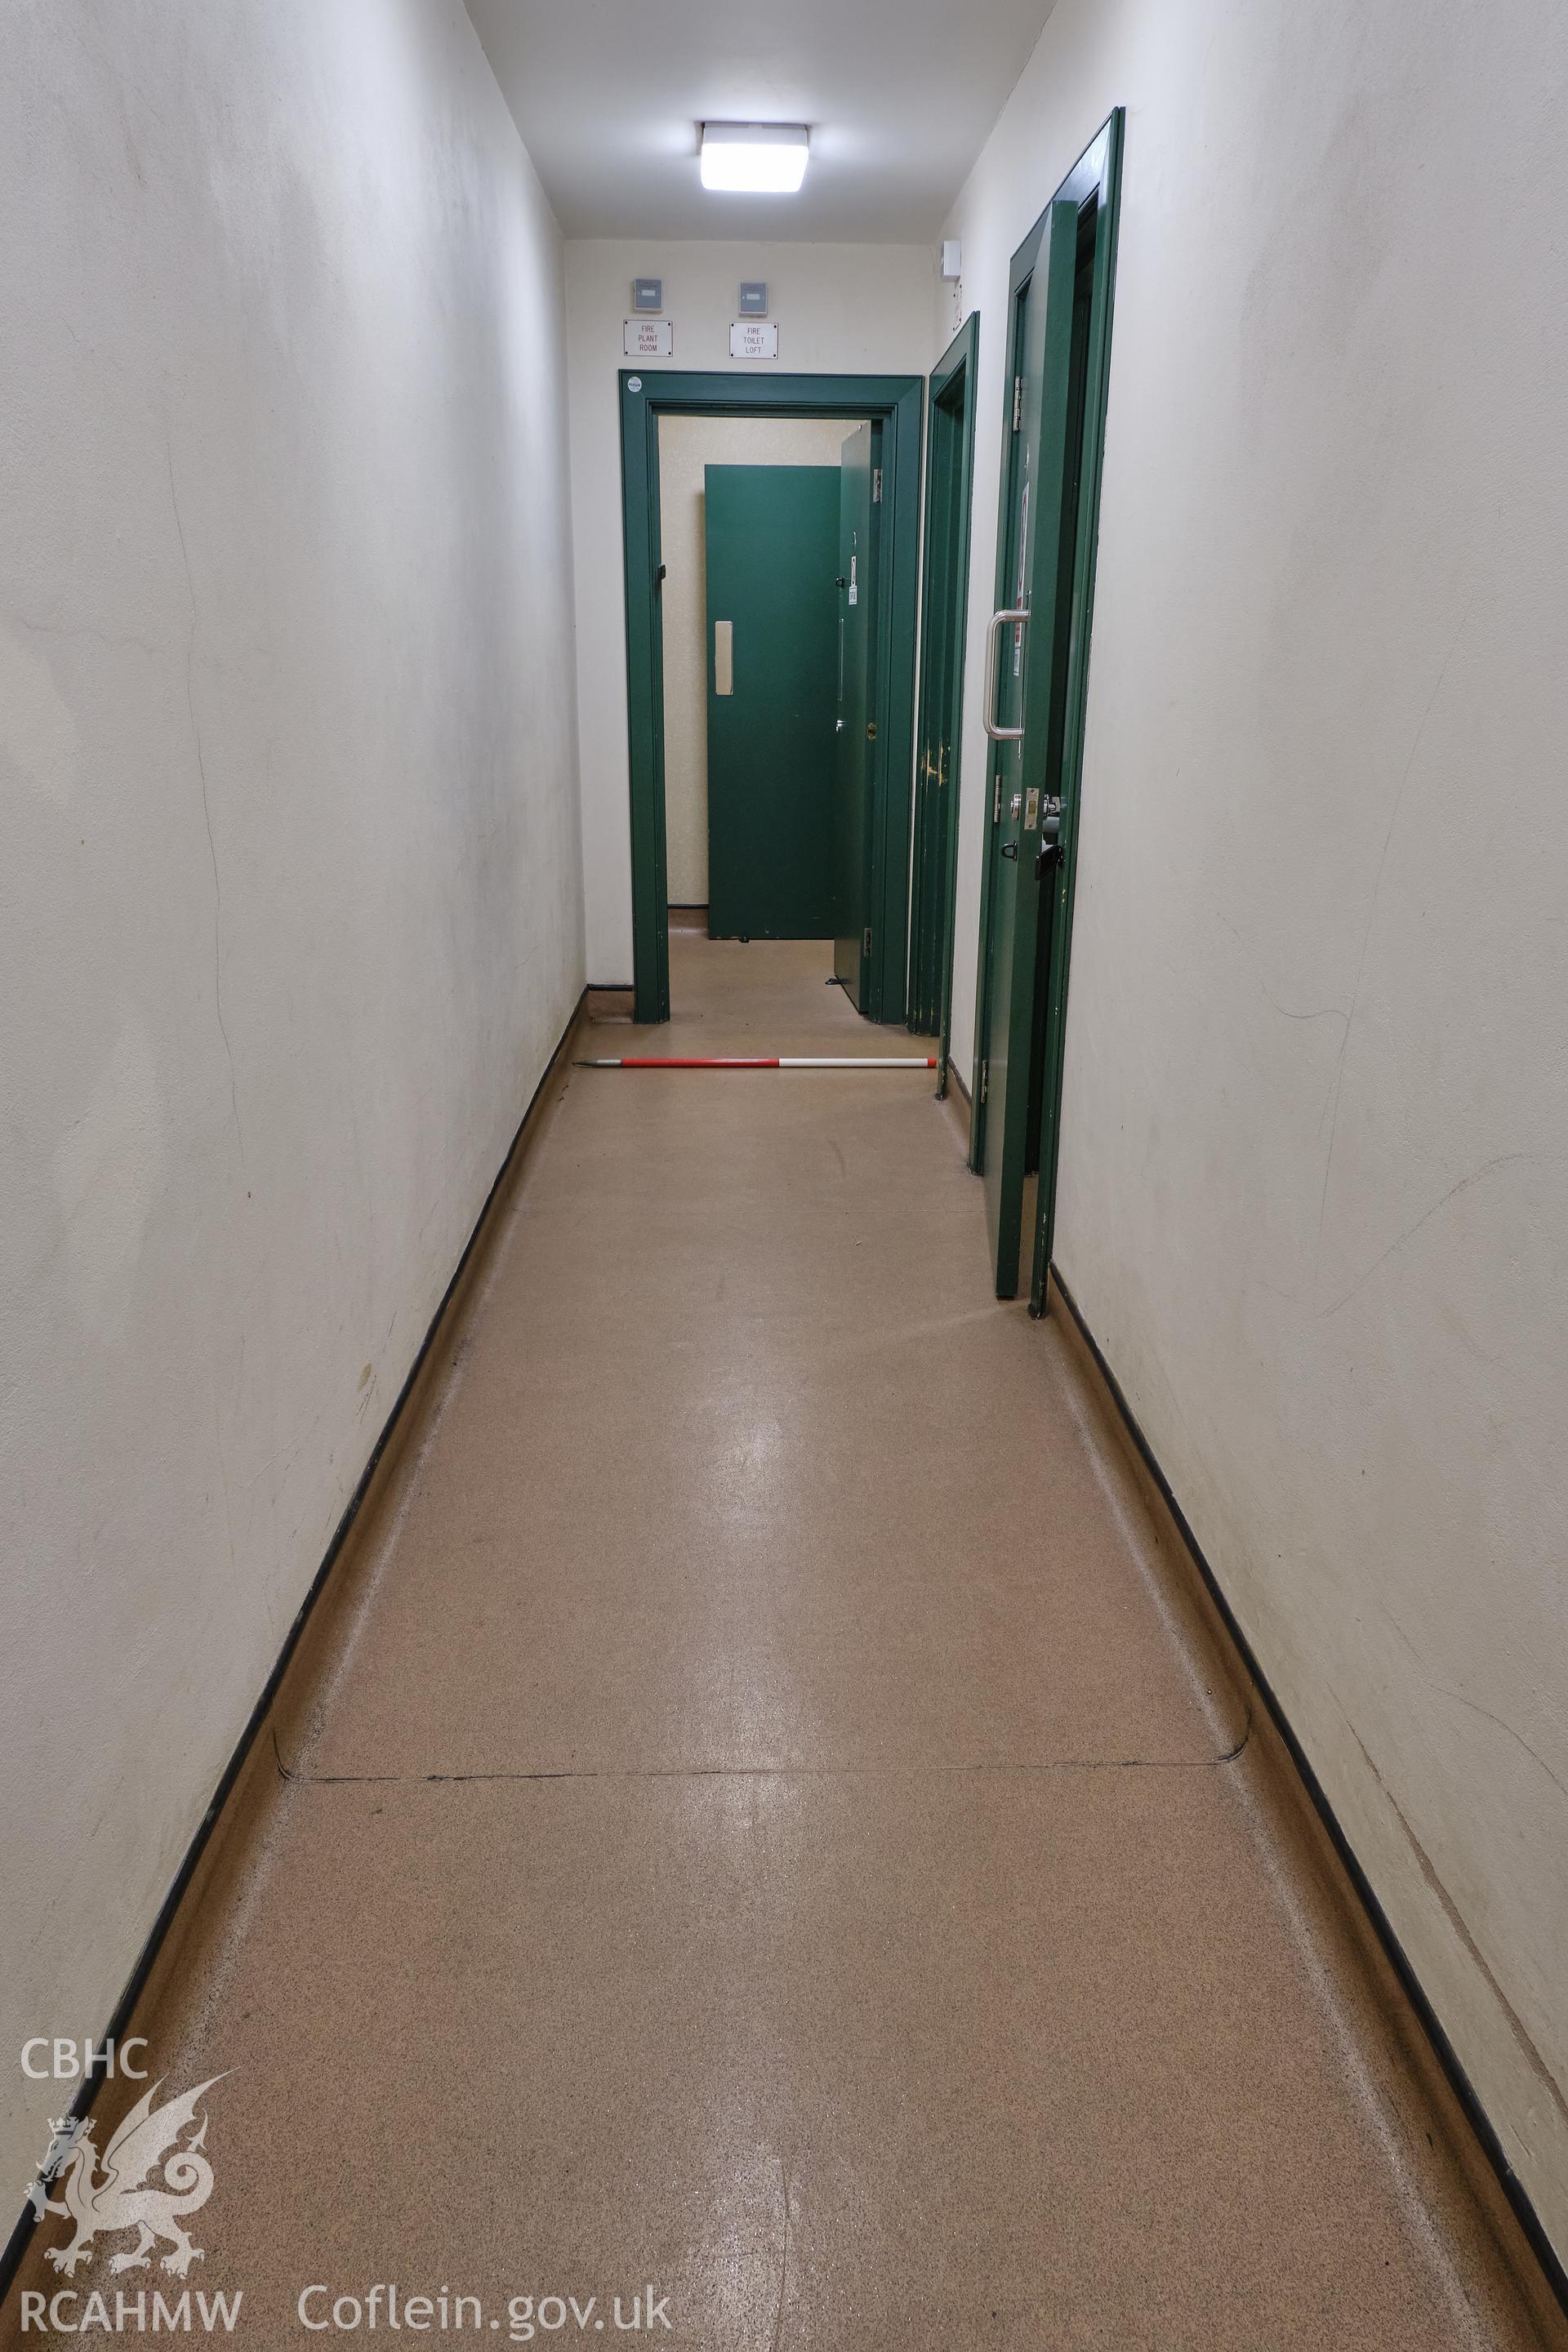 Colour photograph showing Automobile Palace - room G.11 corridor, looking NE. Produced as part of Historic Building Recording for Automobile Palace, carried out by Richard Hayman, June 2021.